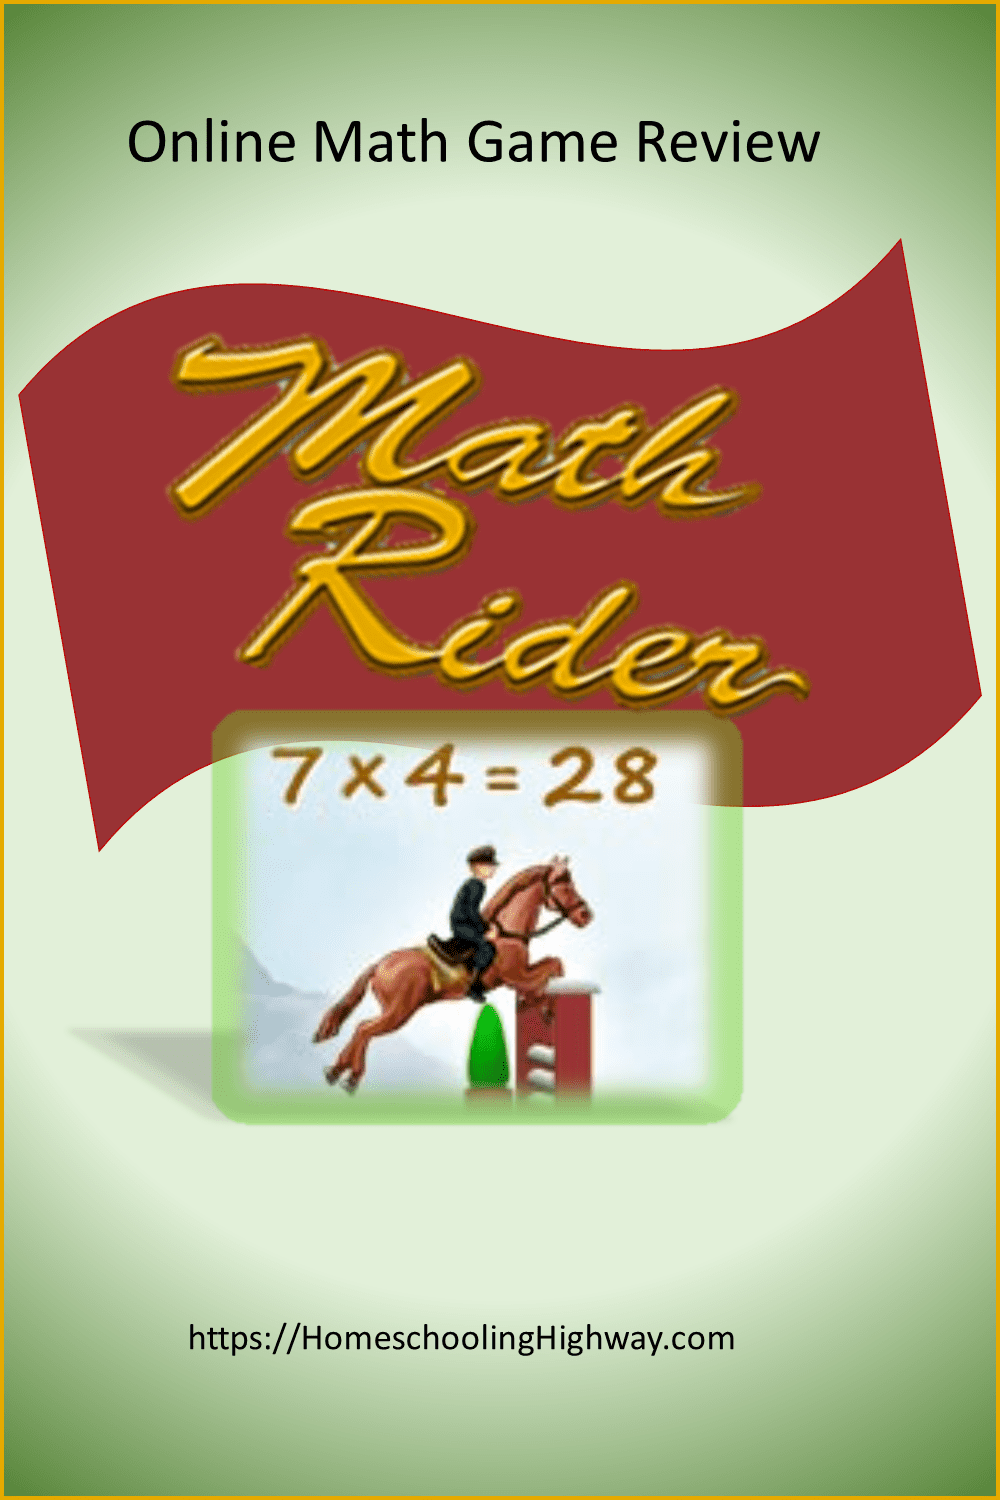 MathRider is an online math game. This review is by Homeschooling Highway.